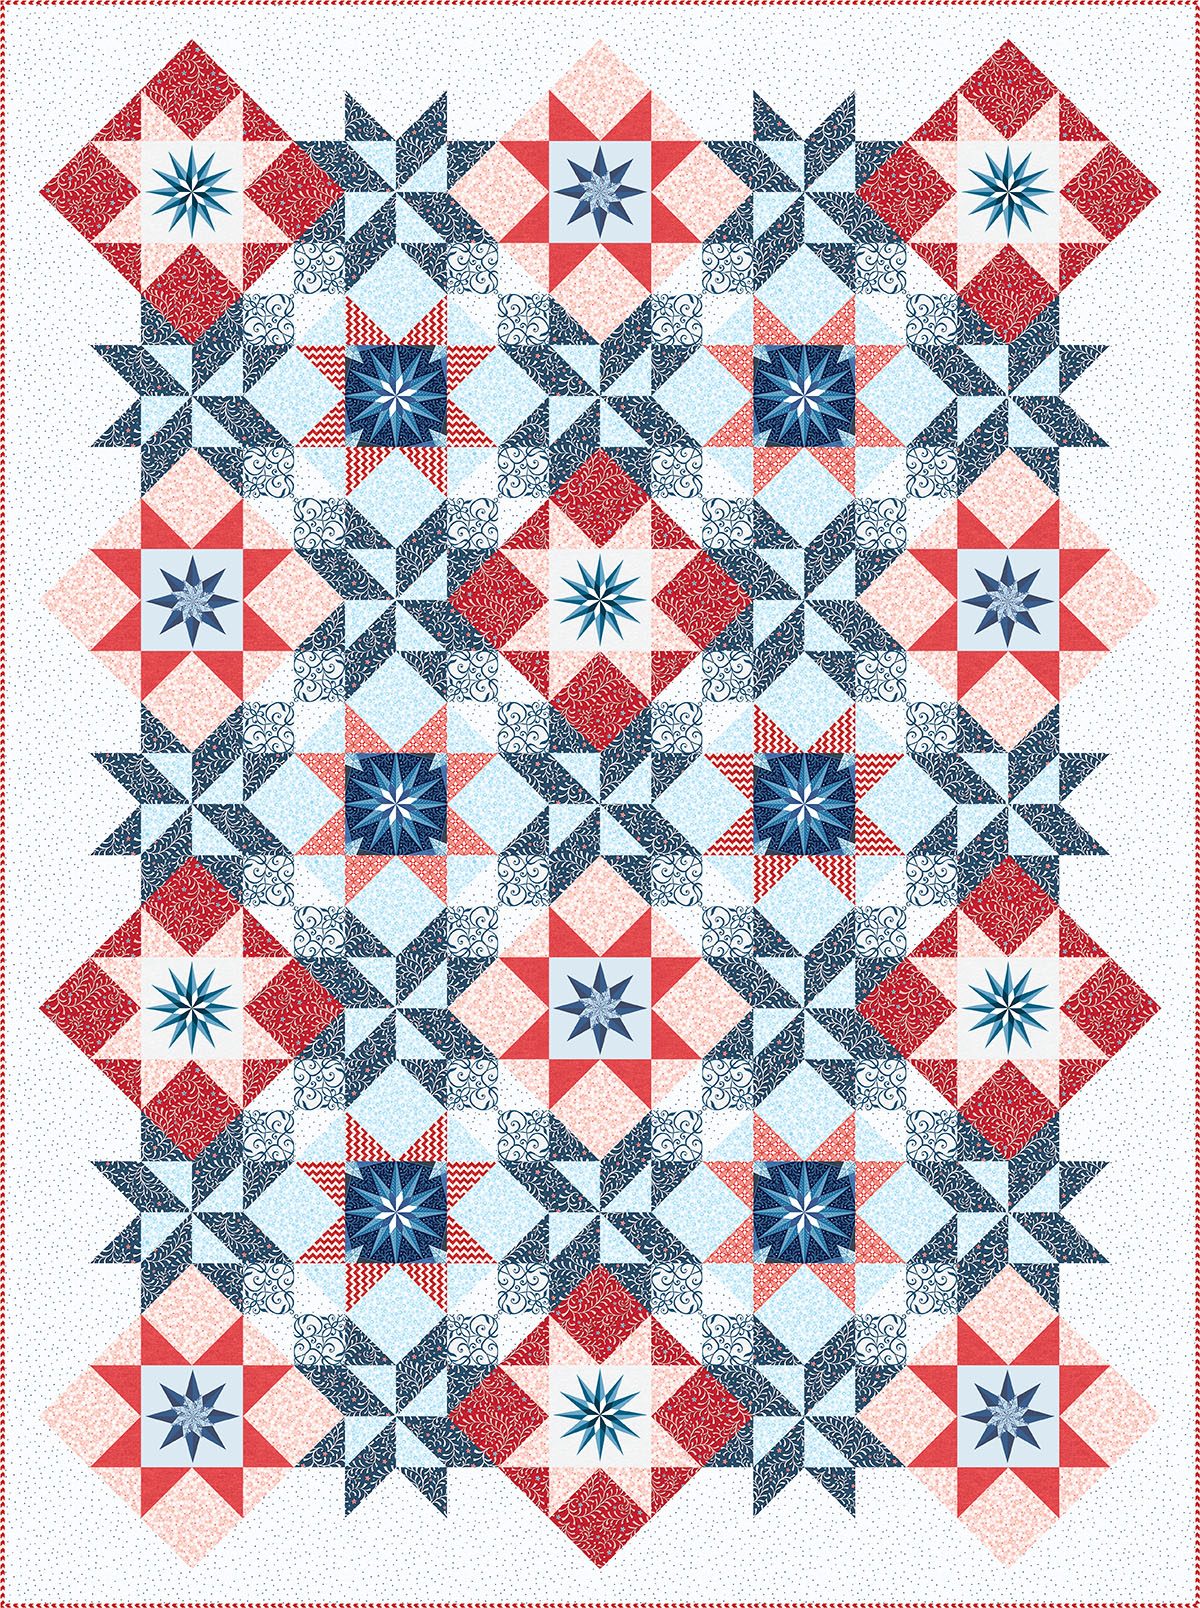 Stardust Quilt - red and blue with bright background